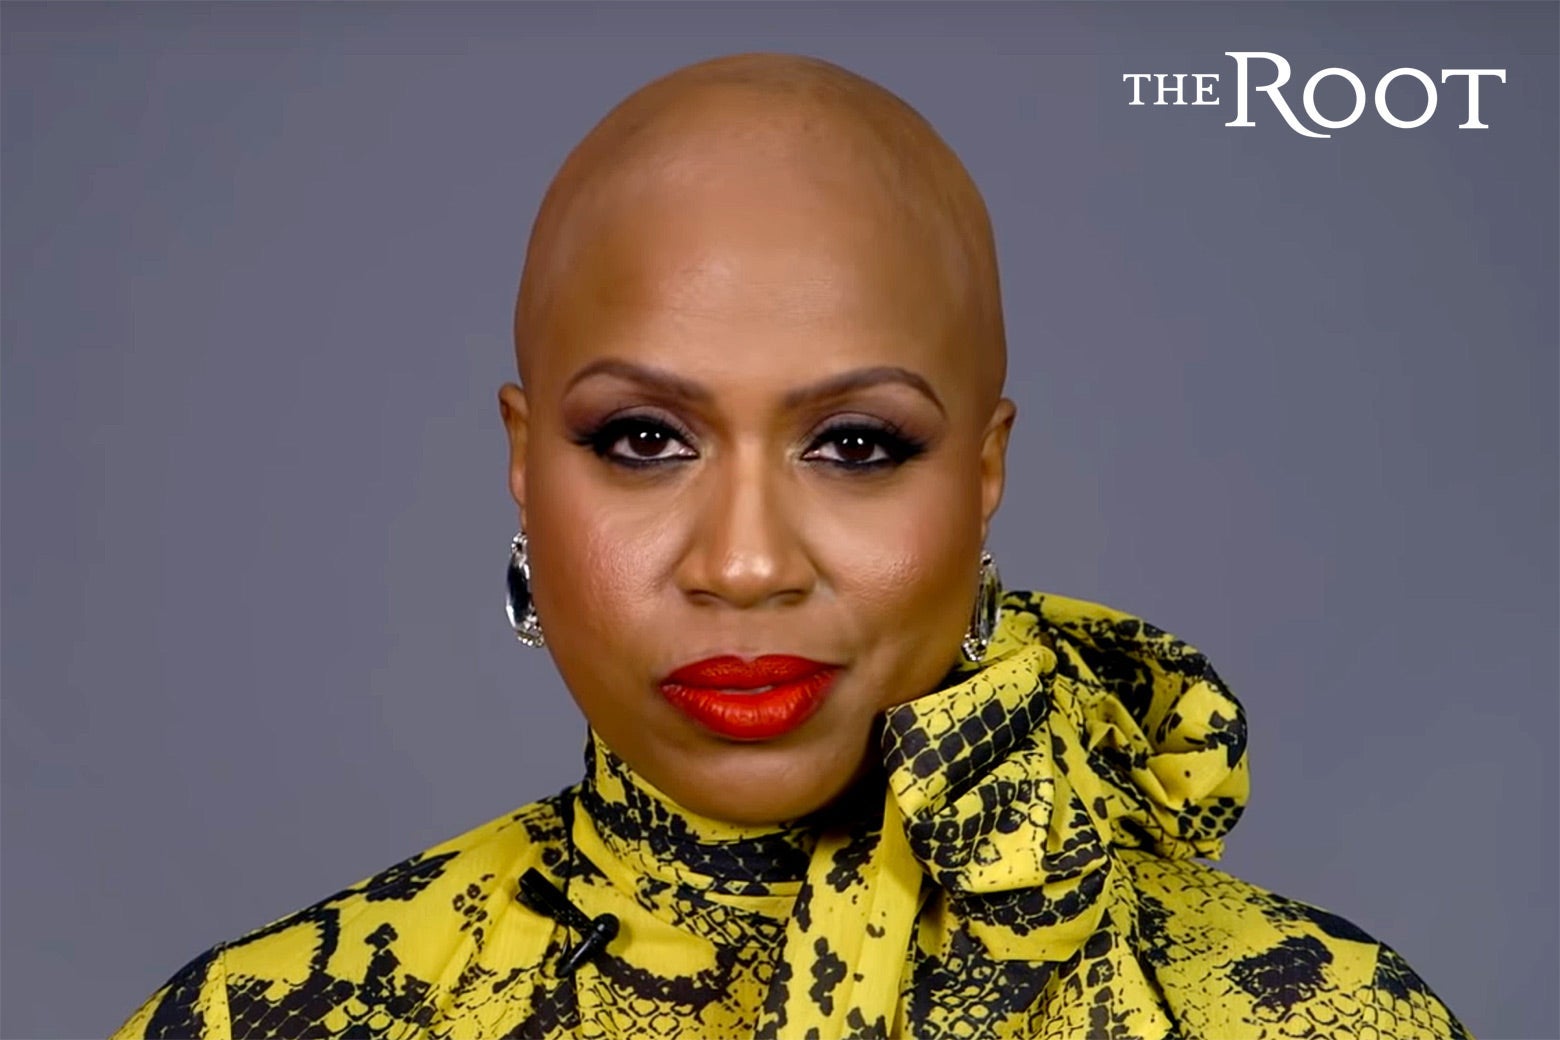 Ayanna Presley facing the camera, in a yellow and black patterned blouse, with her head fully bald.